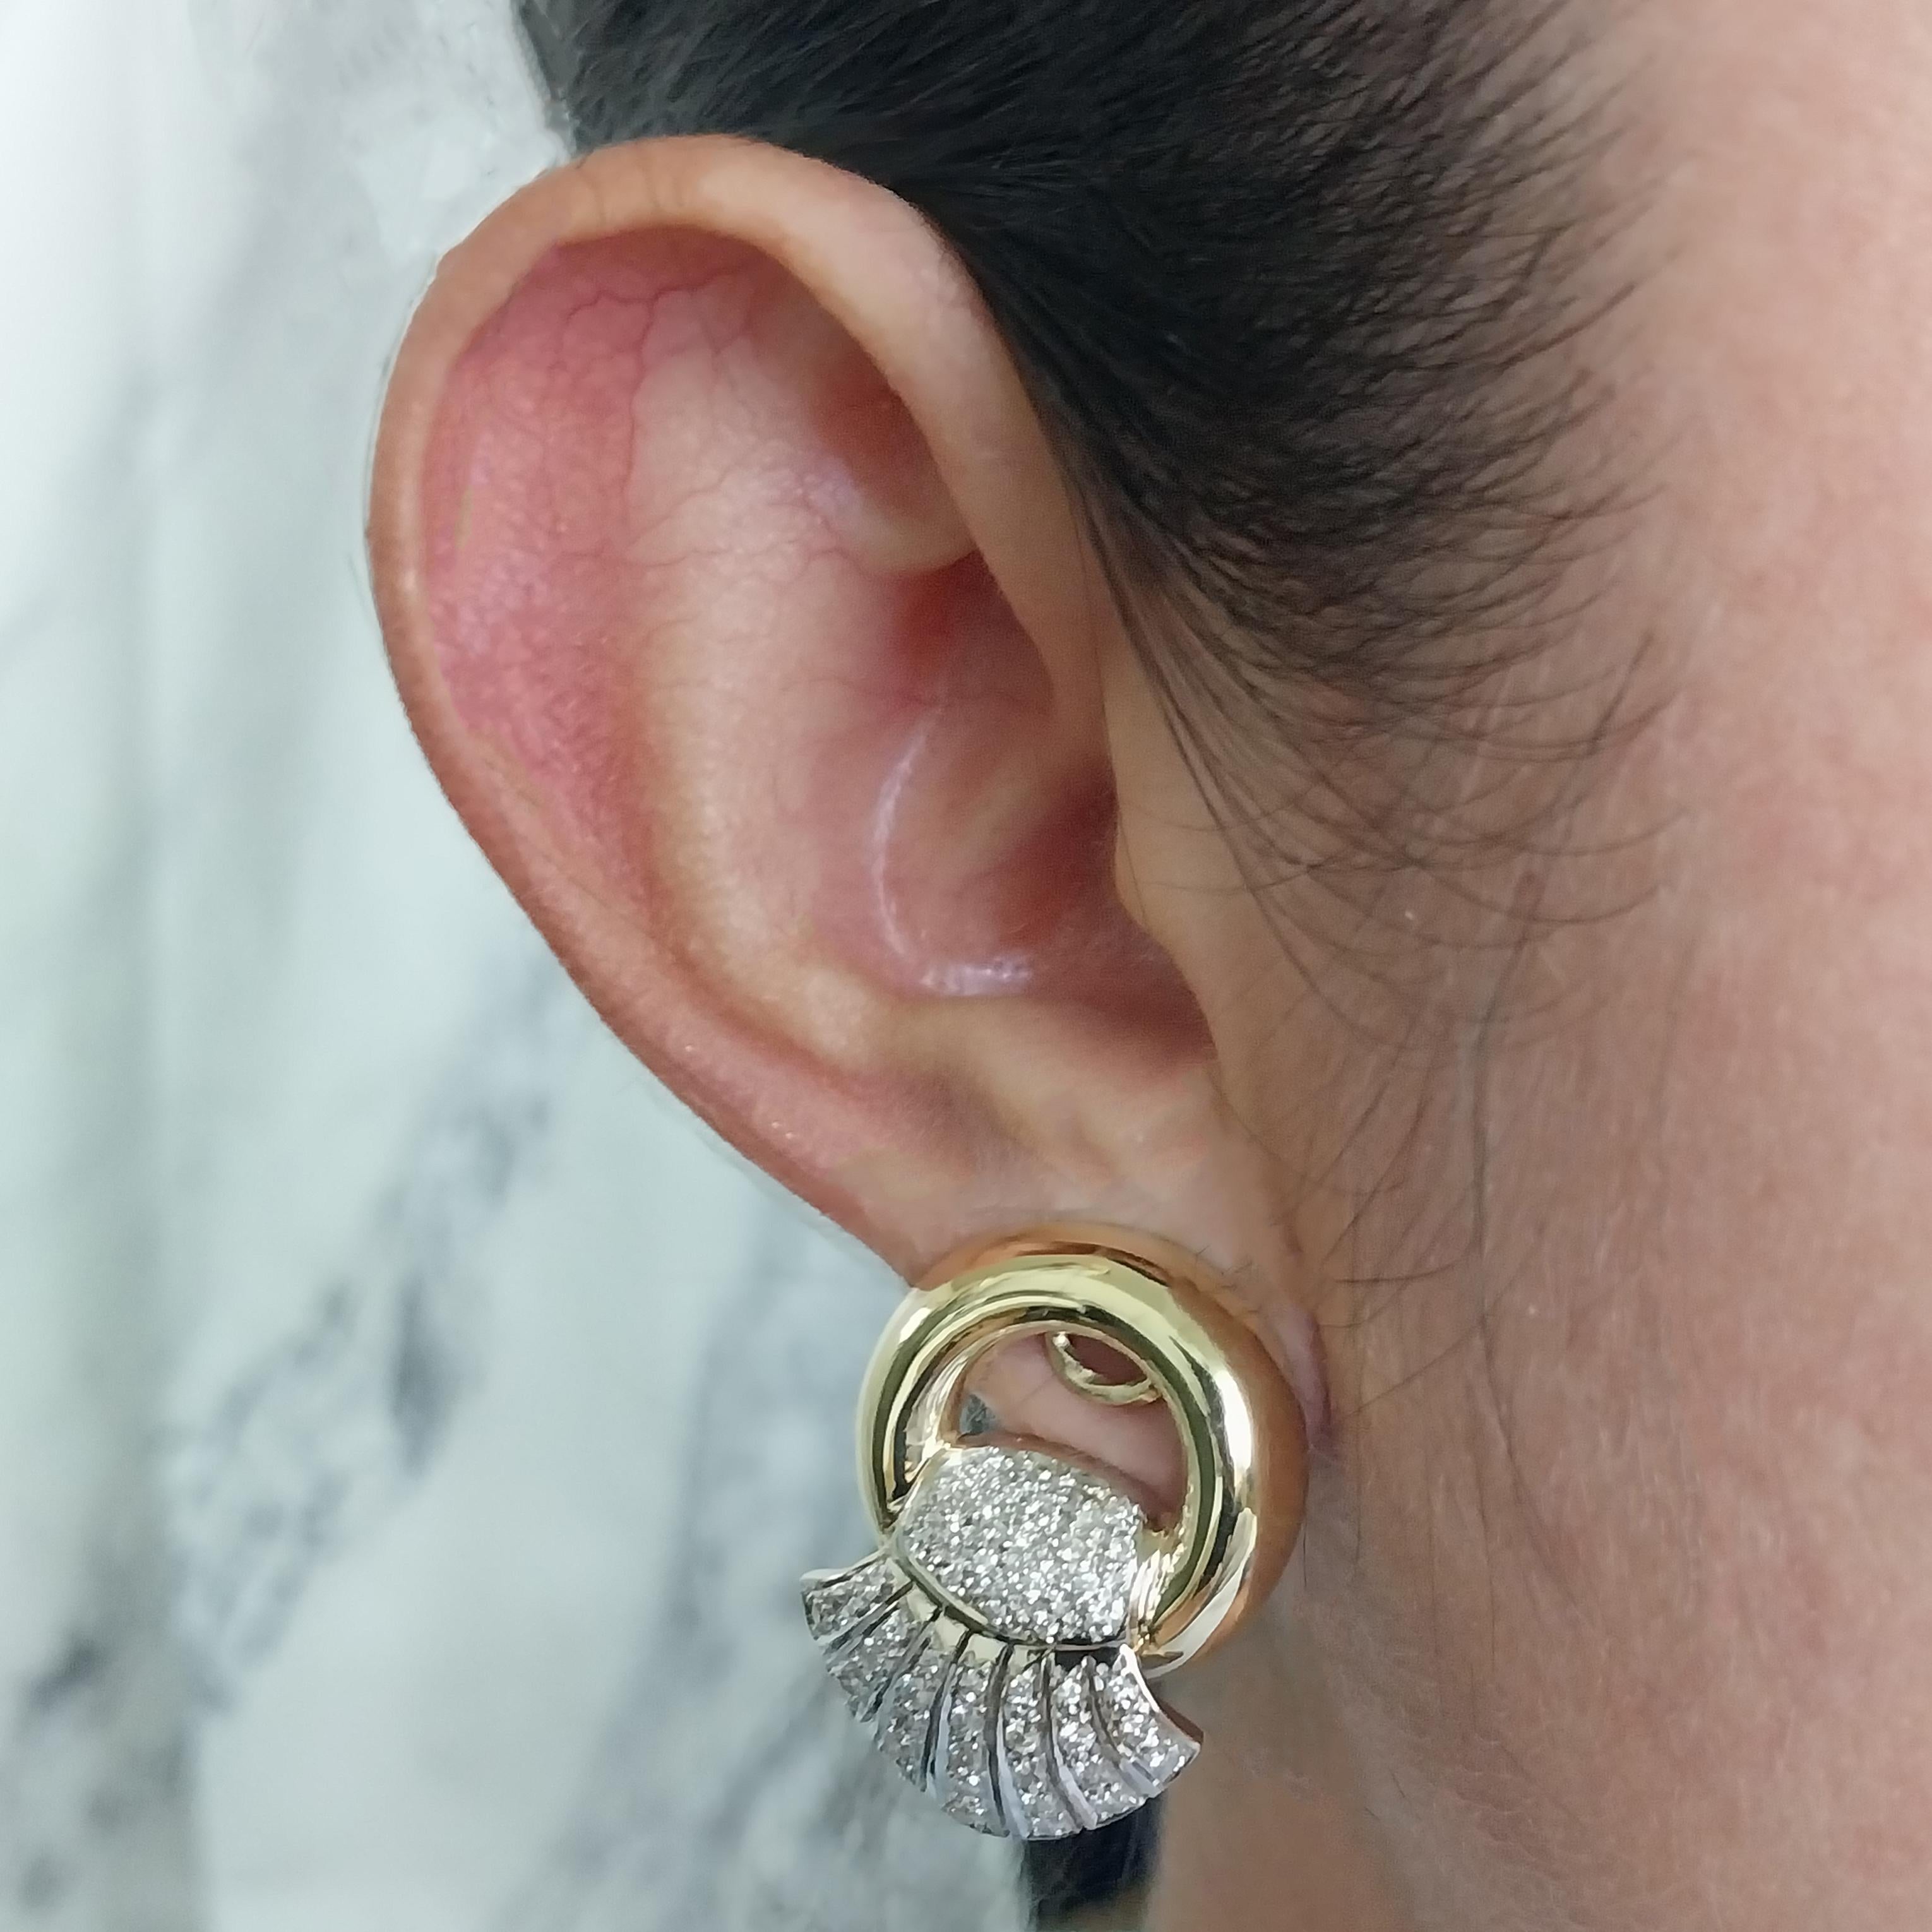 18 Karat Yellow Gold Fan Earrings Featuring 92 Round Brilliant Cut Diamonds of VS Clarity and H Color Totaling Approximately 1.00 Carat. Unpierced Design with Clip Back. Finished Weight is 23.3 Grams.

Matching bracelet available in separate listing.